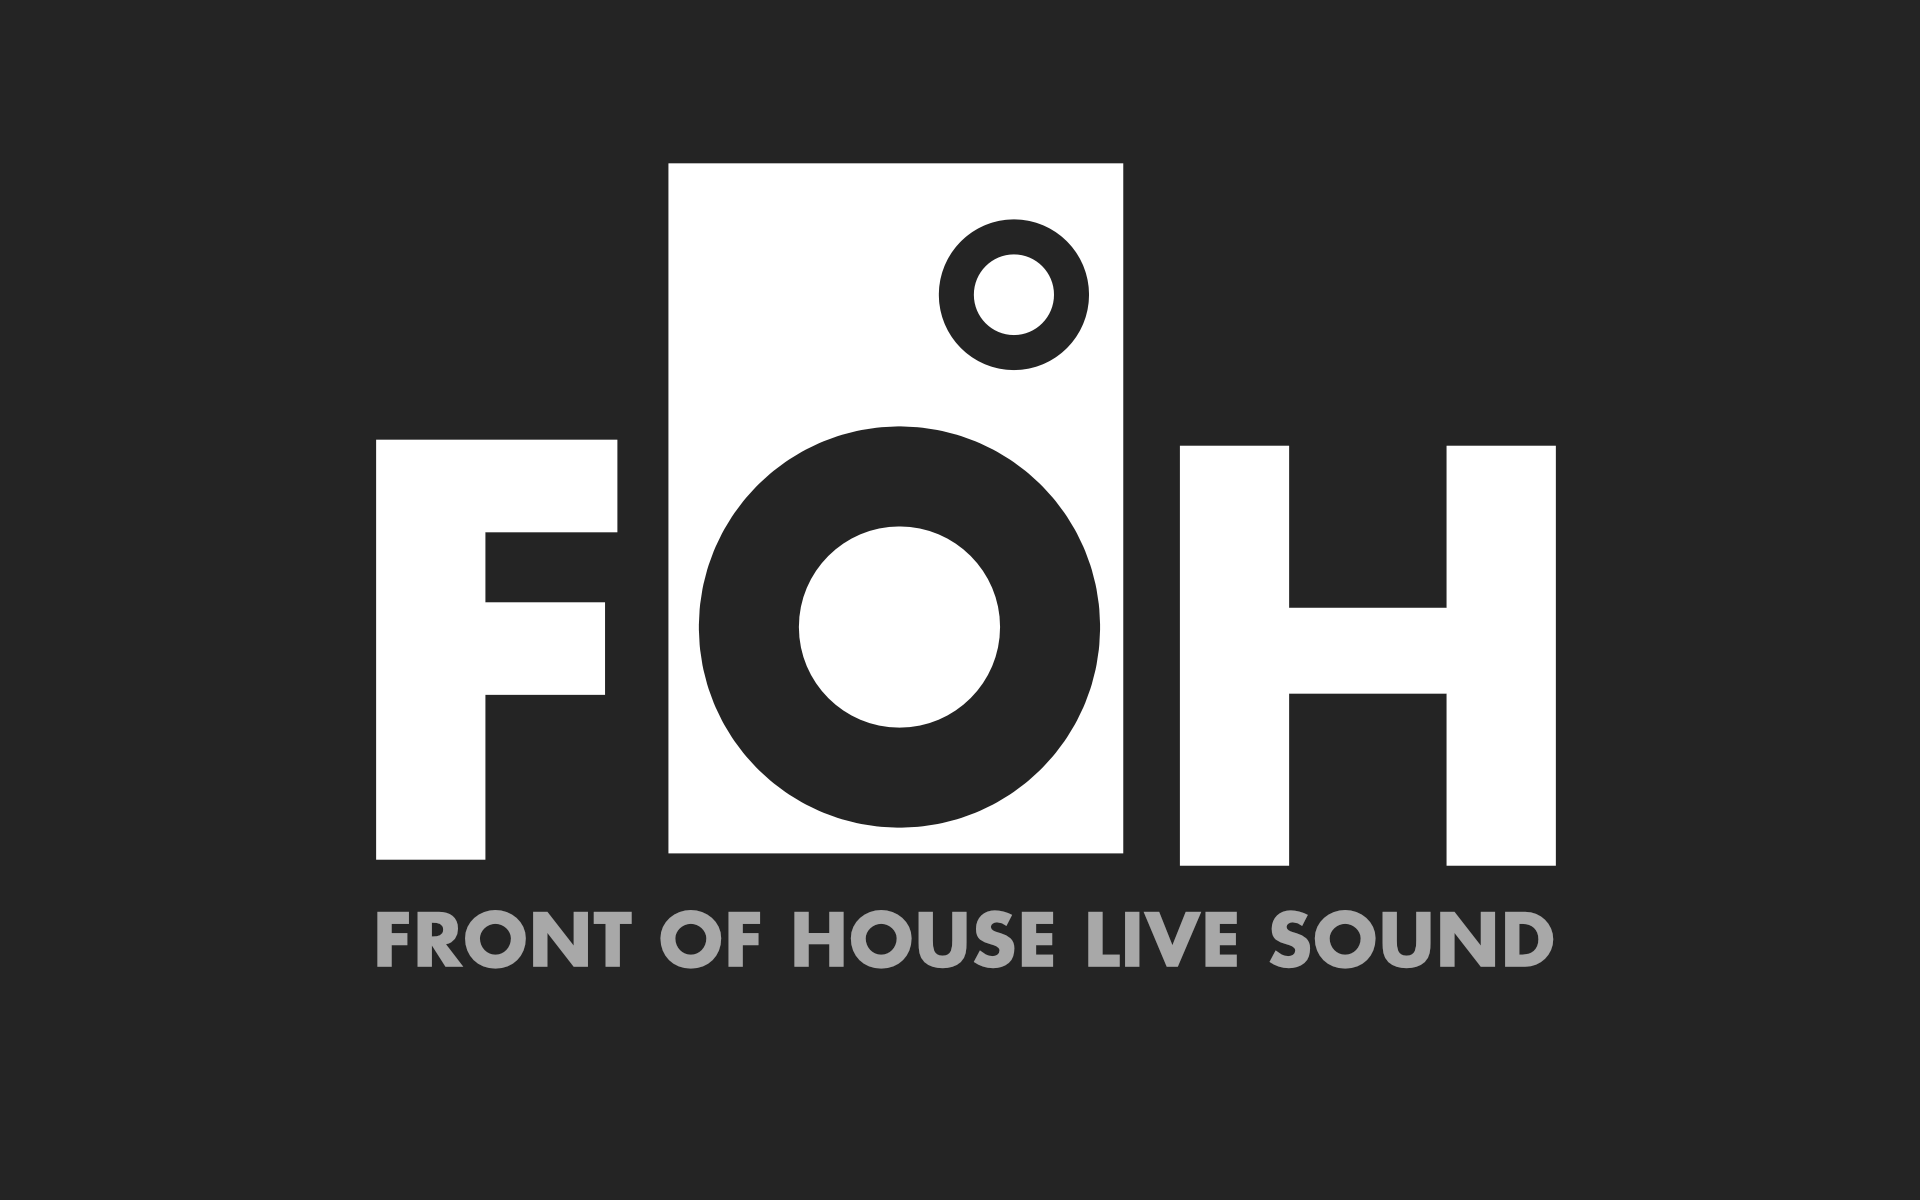 Front of House Live Sound